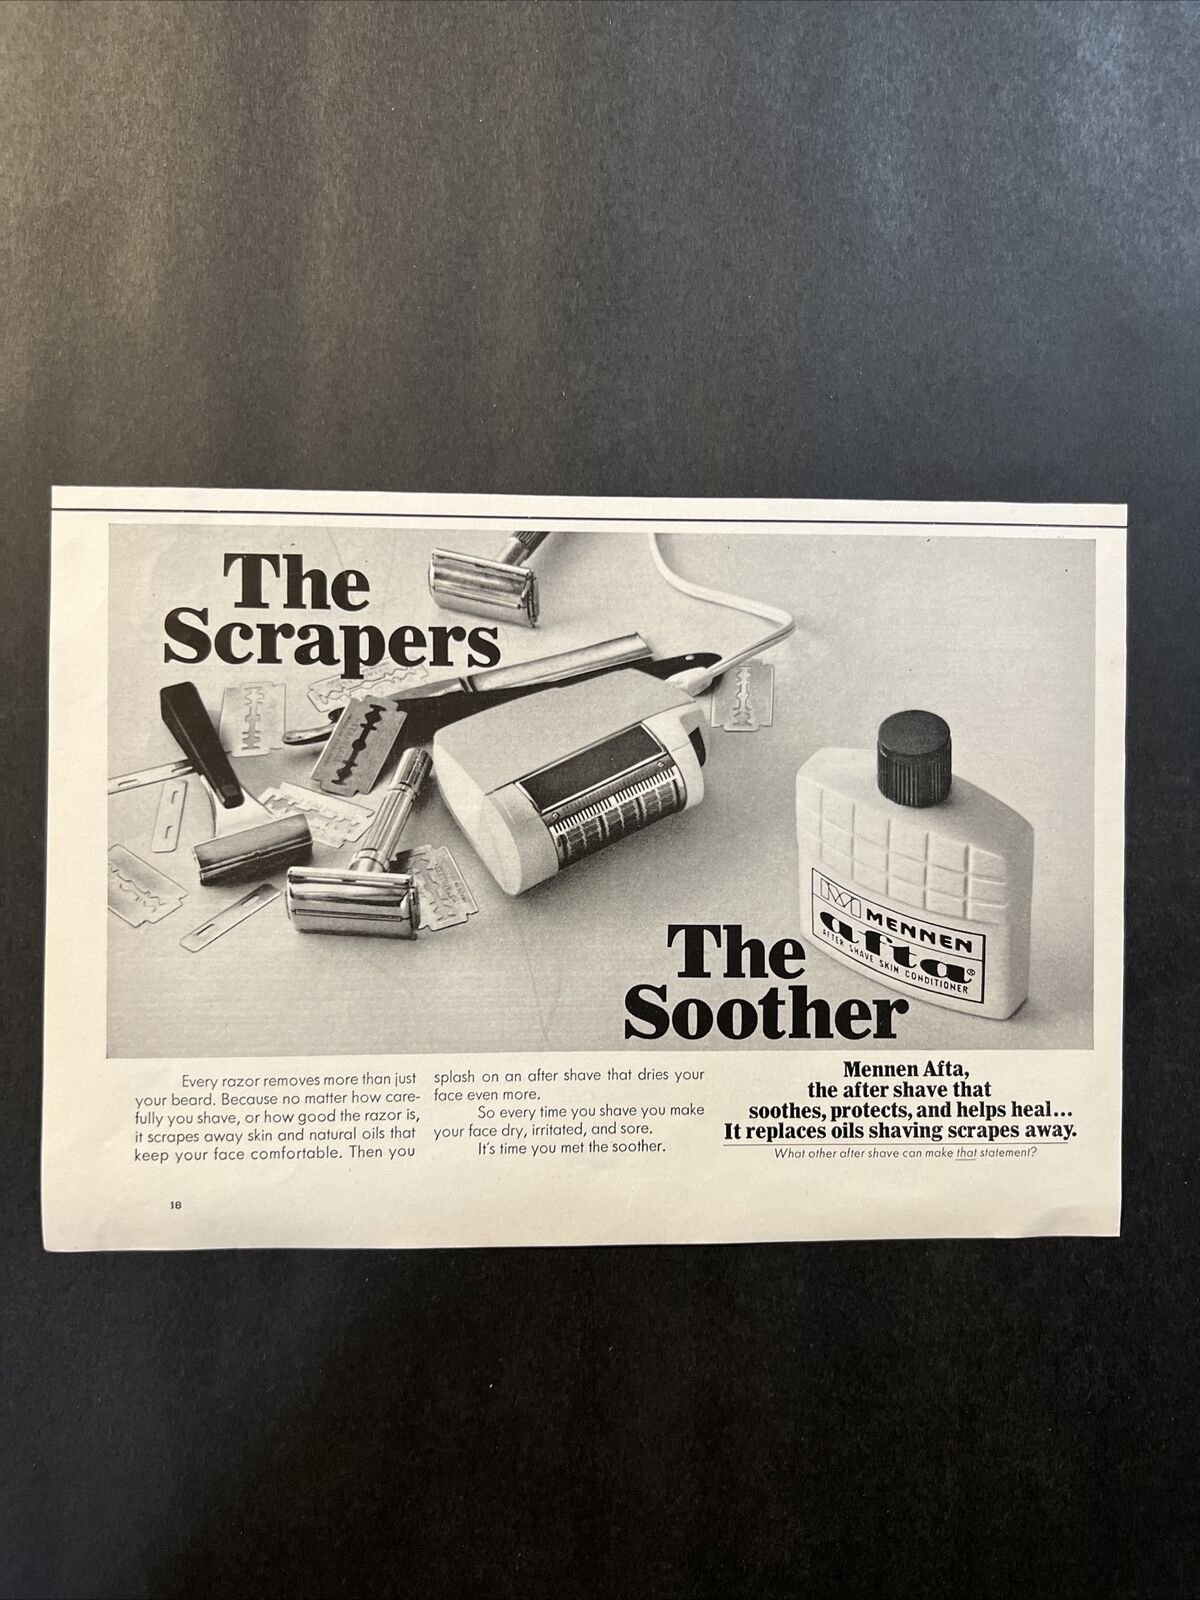 1967 Mennen Afta After Shave Vintage Print Ad The Scrapers The Soother